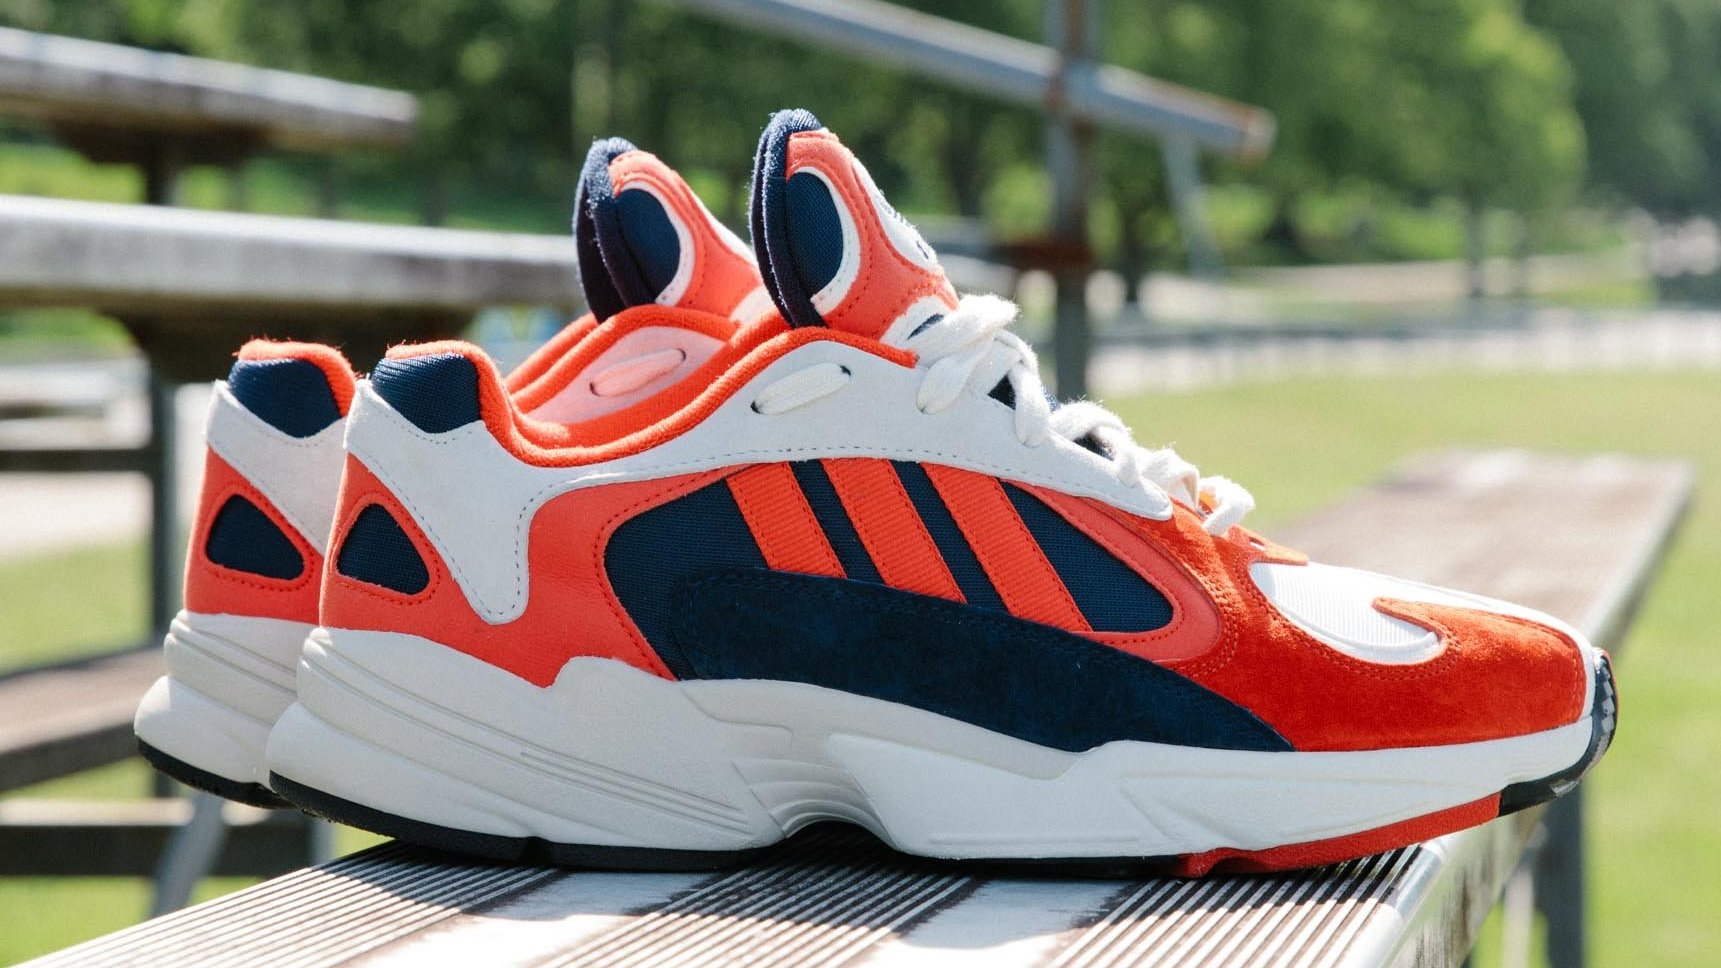 Adidas Yung-1 'Chalk White/Core Navy' Available Now | Sole Collector